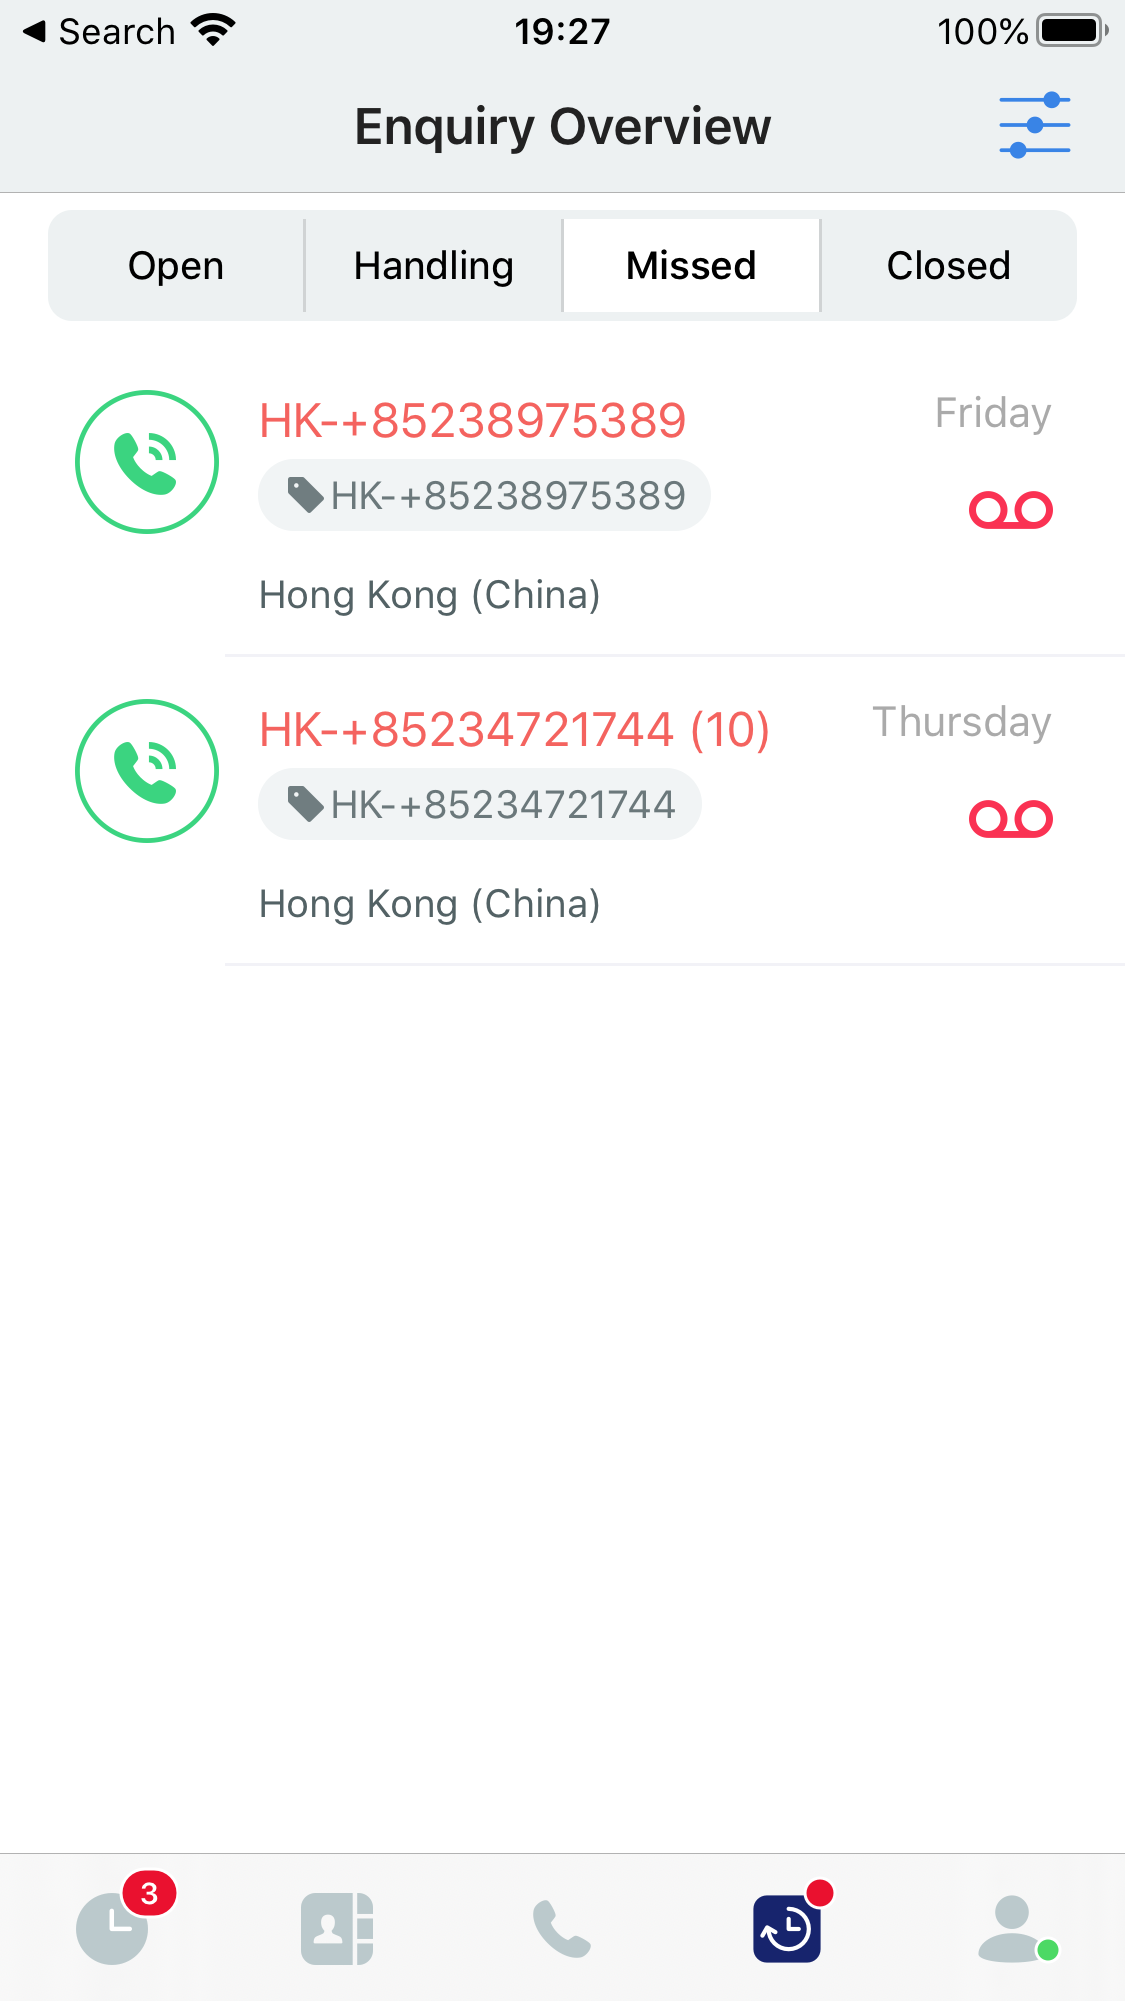 Missed Enquiry with Voicemails only